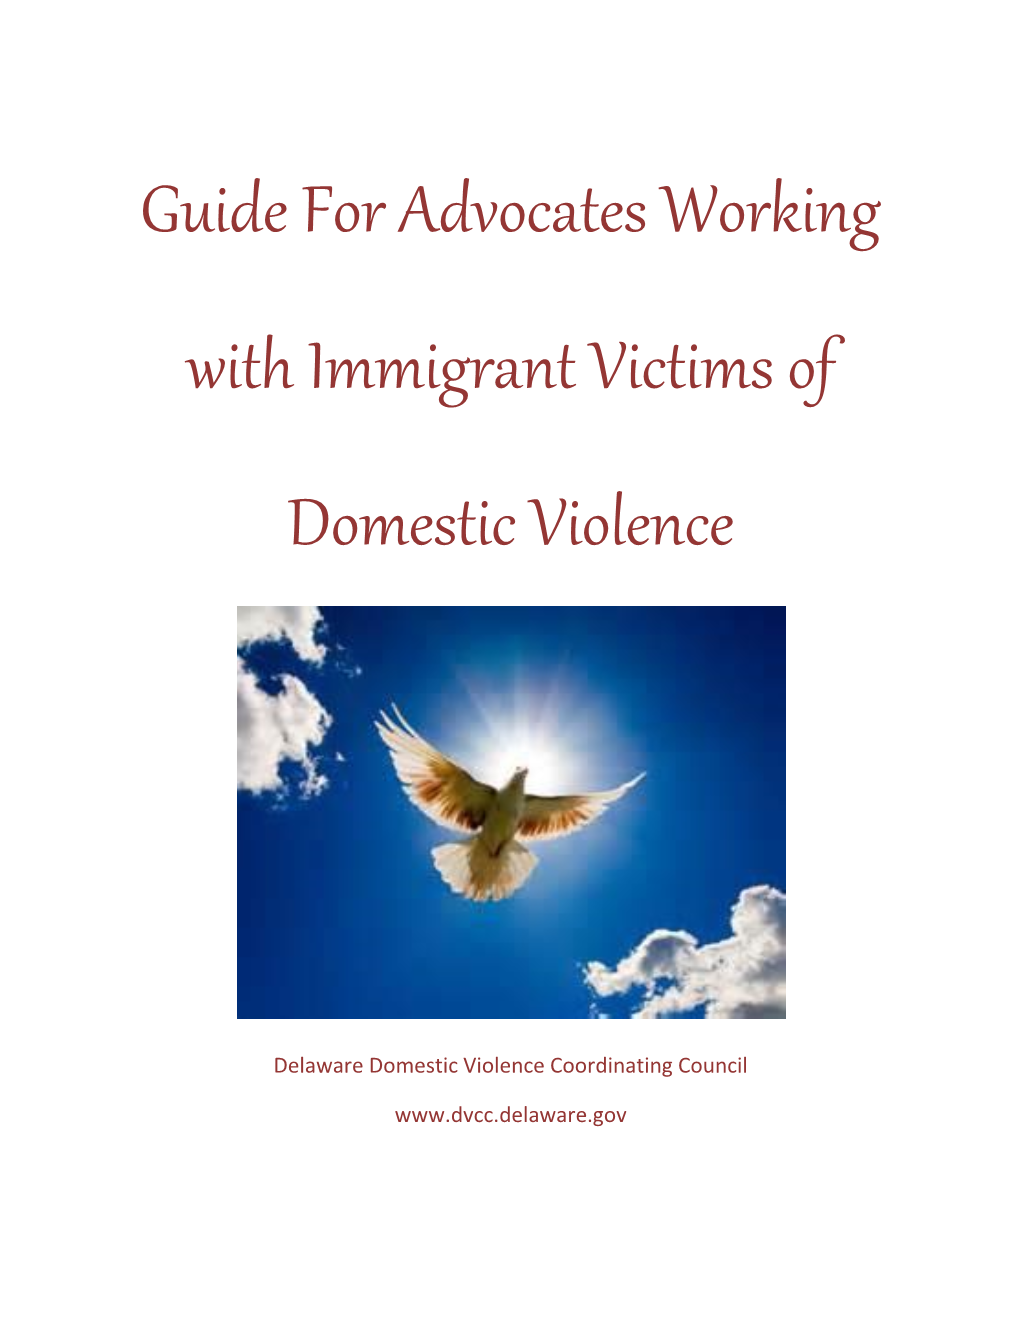 Guide for Advocates Working with Immigrant Victims of Domestic Violence